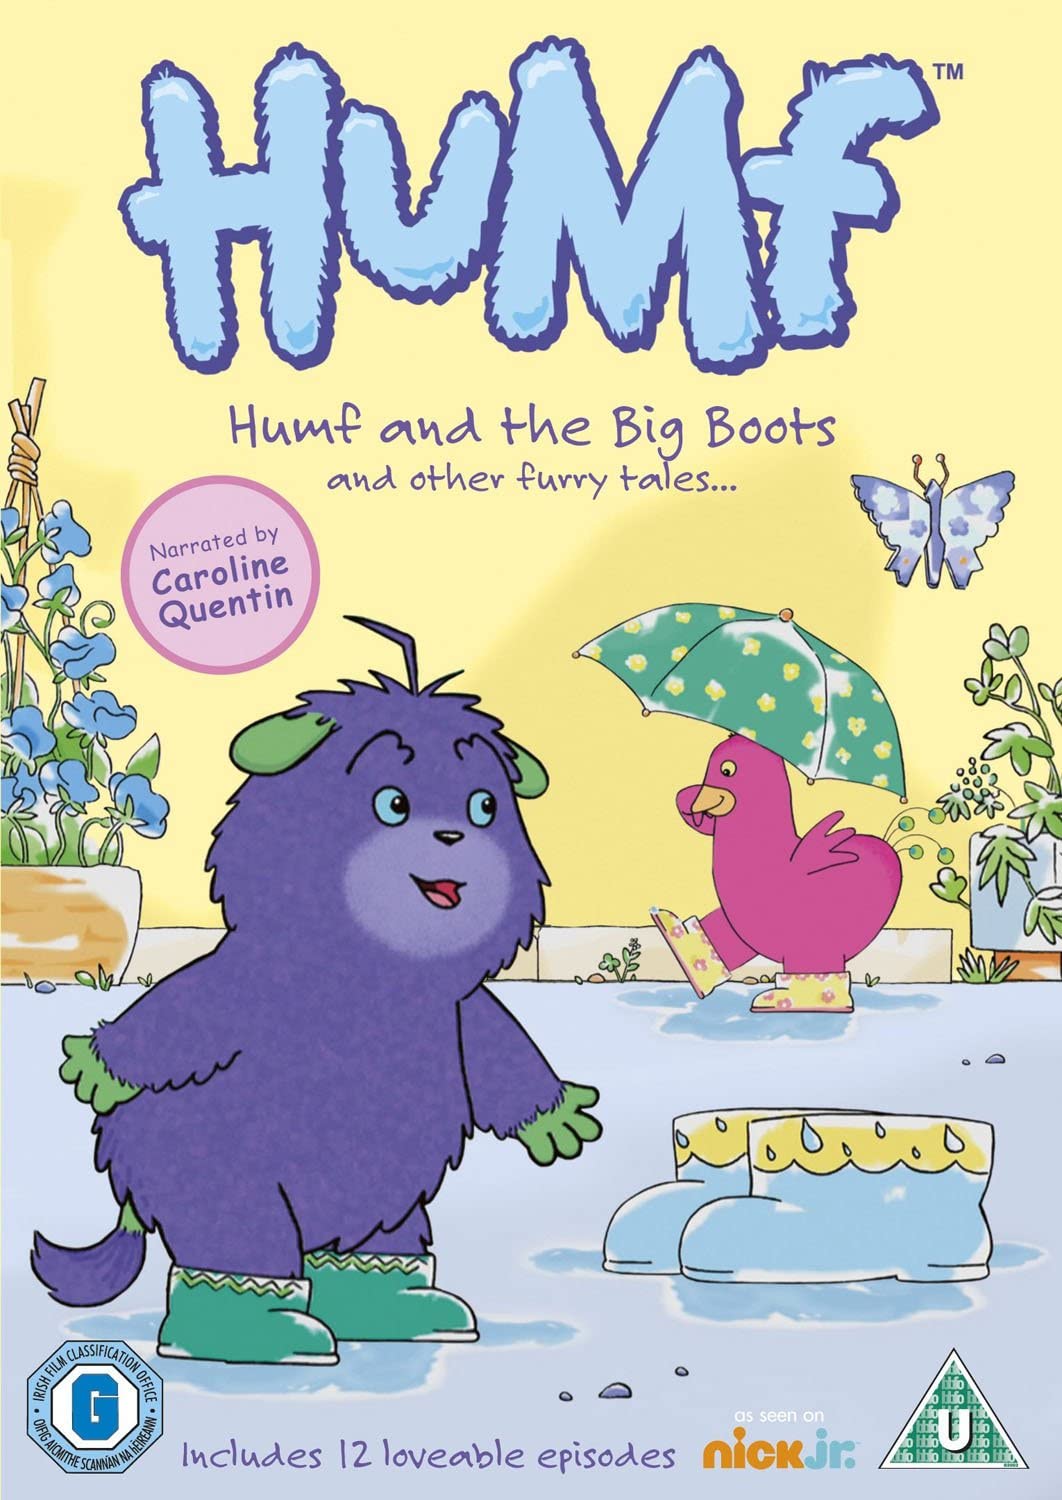 Humf Volume 2: Humf and the Big Boots - Animation [DVD]